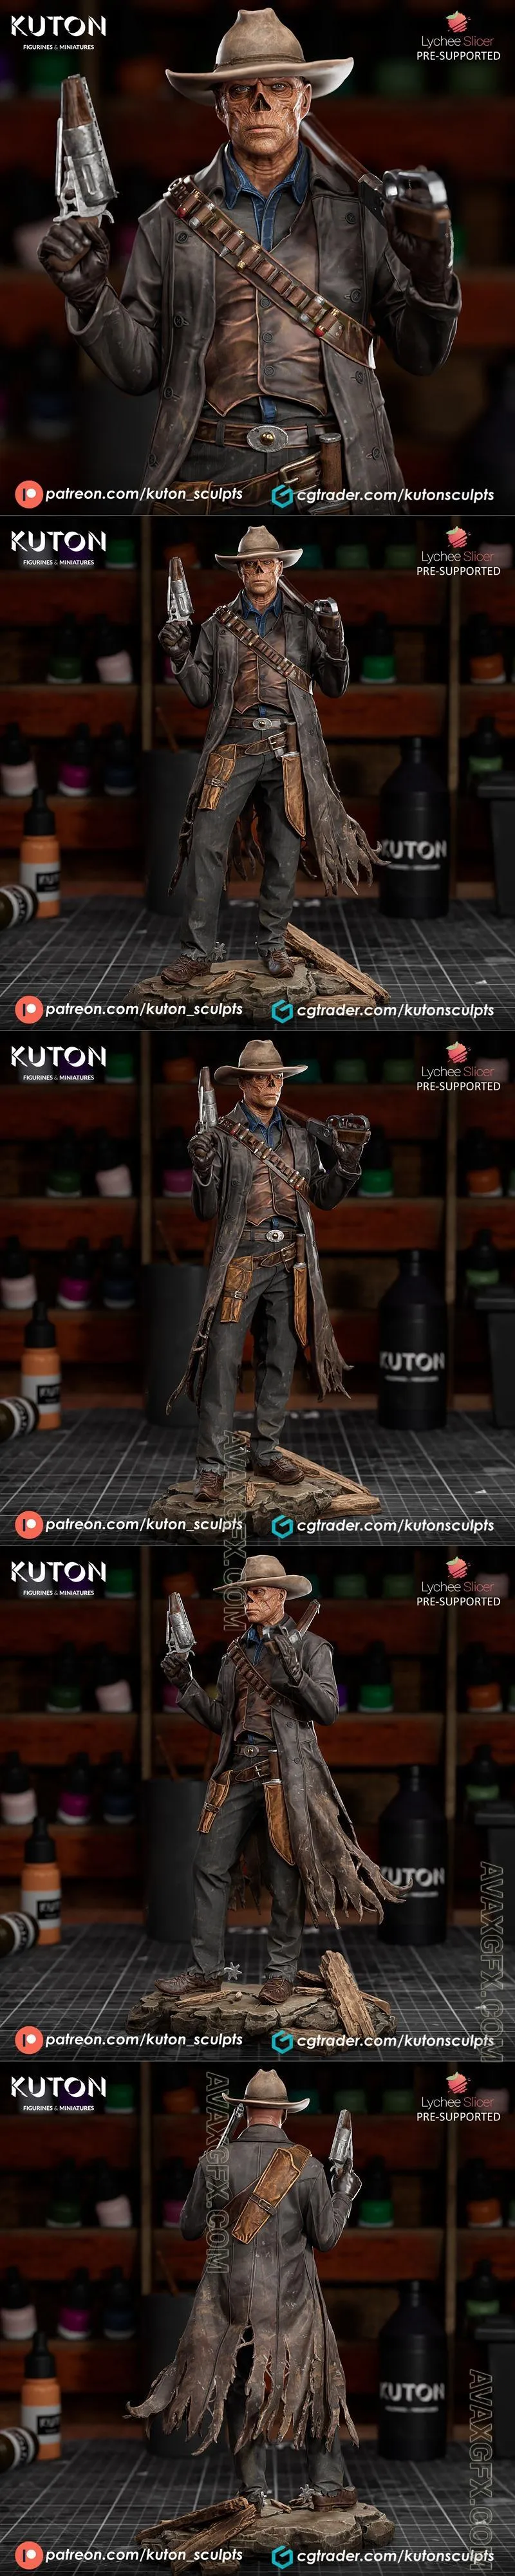 Kuton Figurines - The Ghoul - STL 3D Model